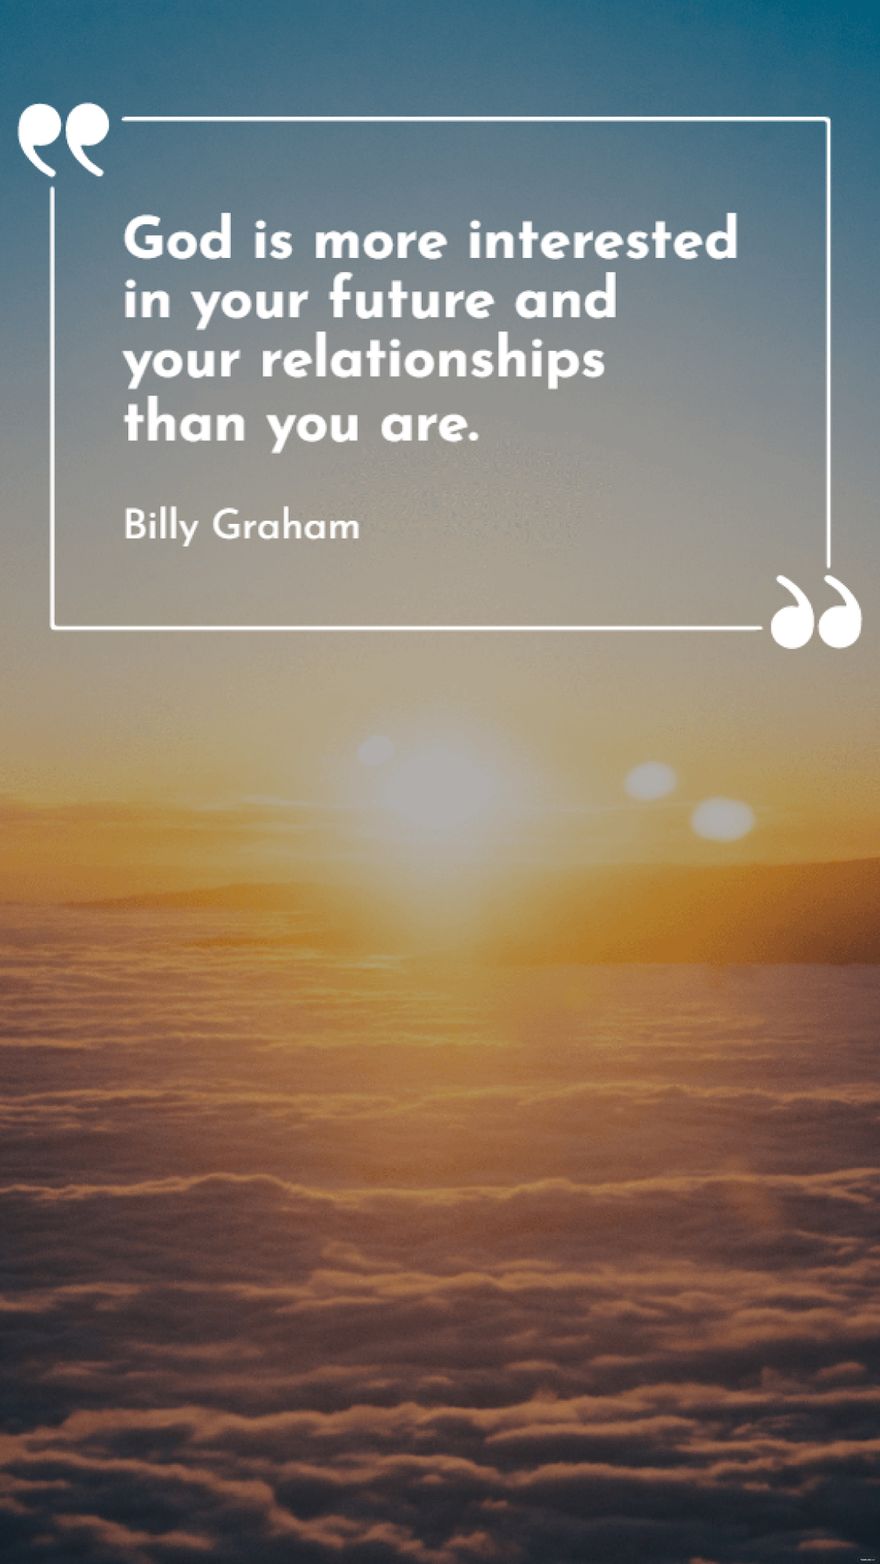 Billy Graham  God is more interested in your future and your relationships than you are